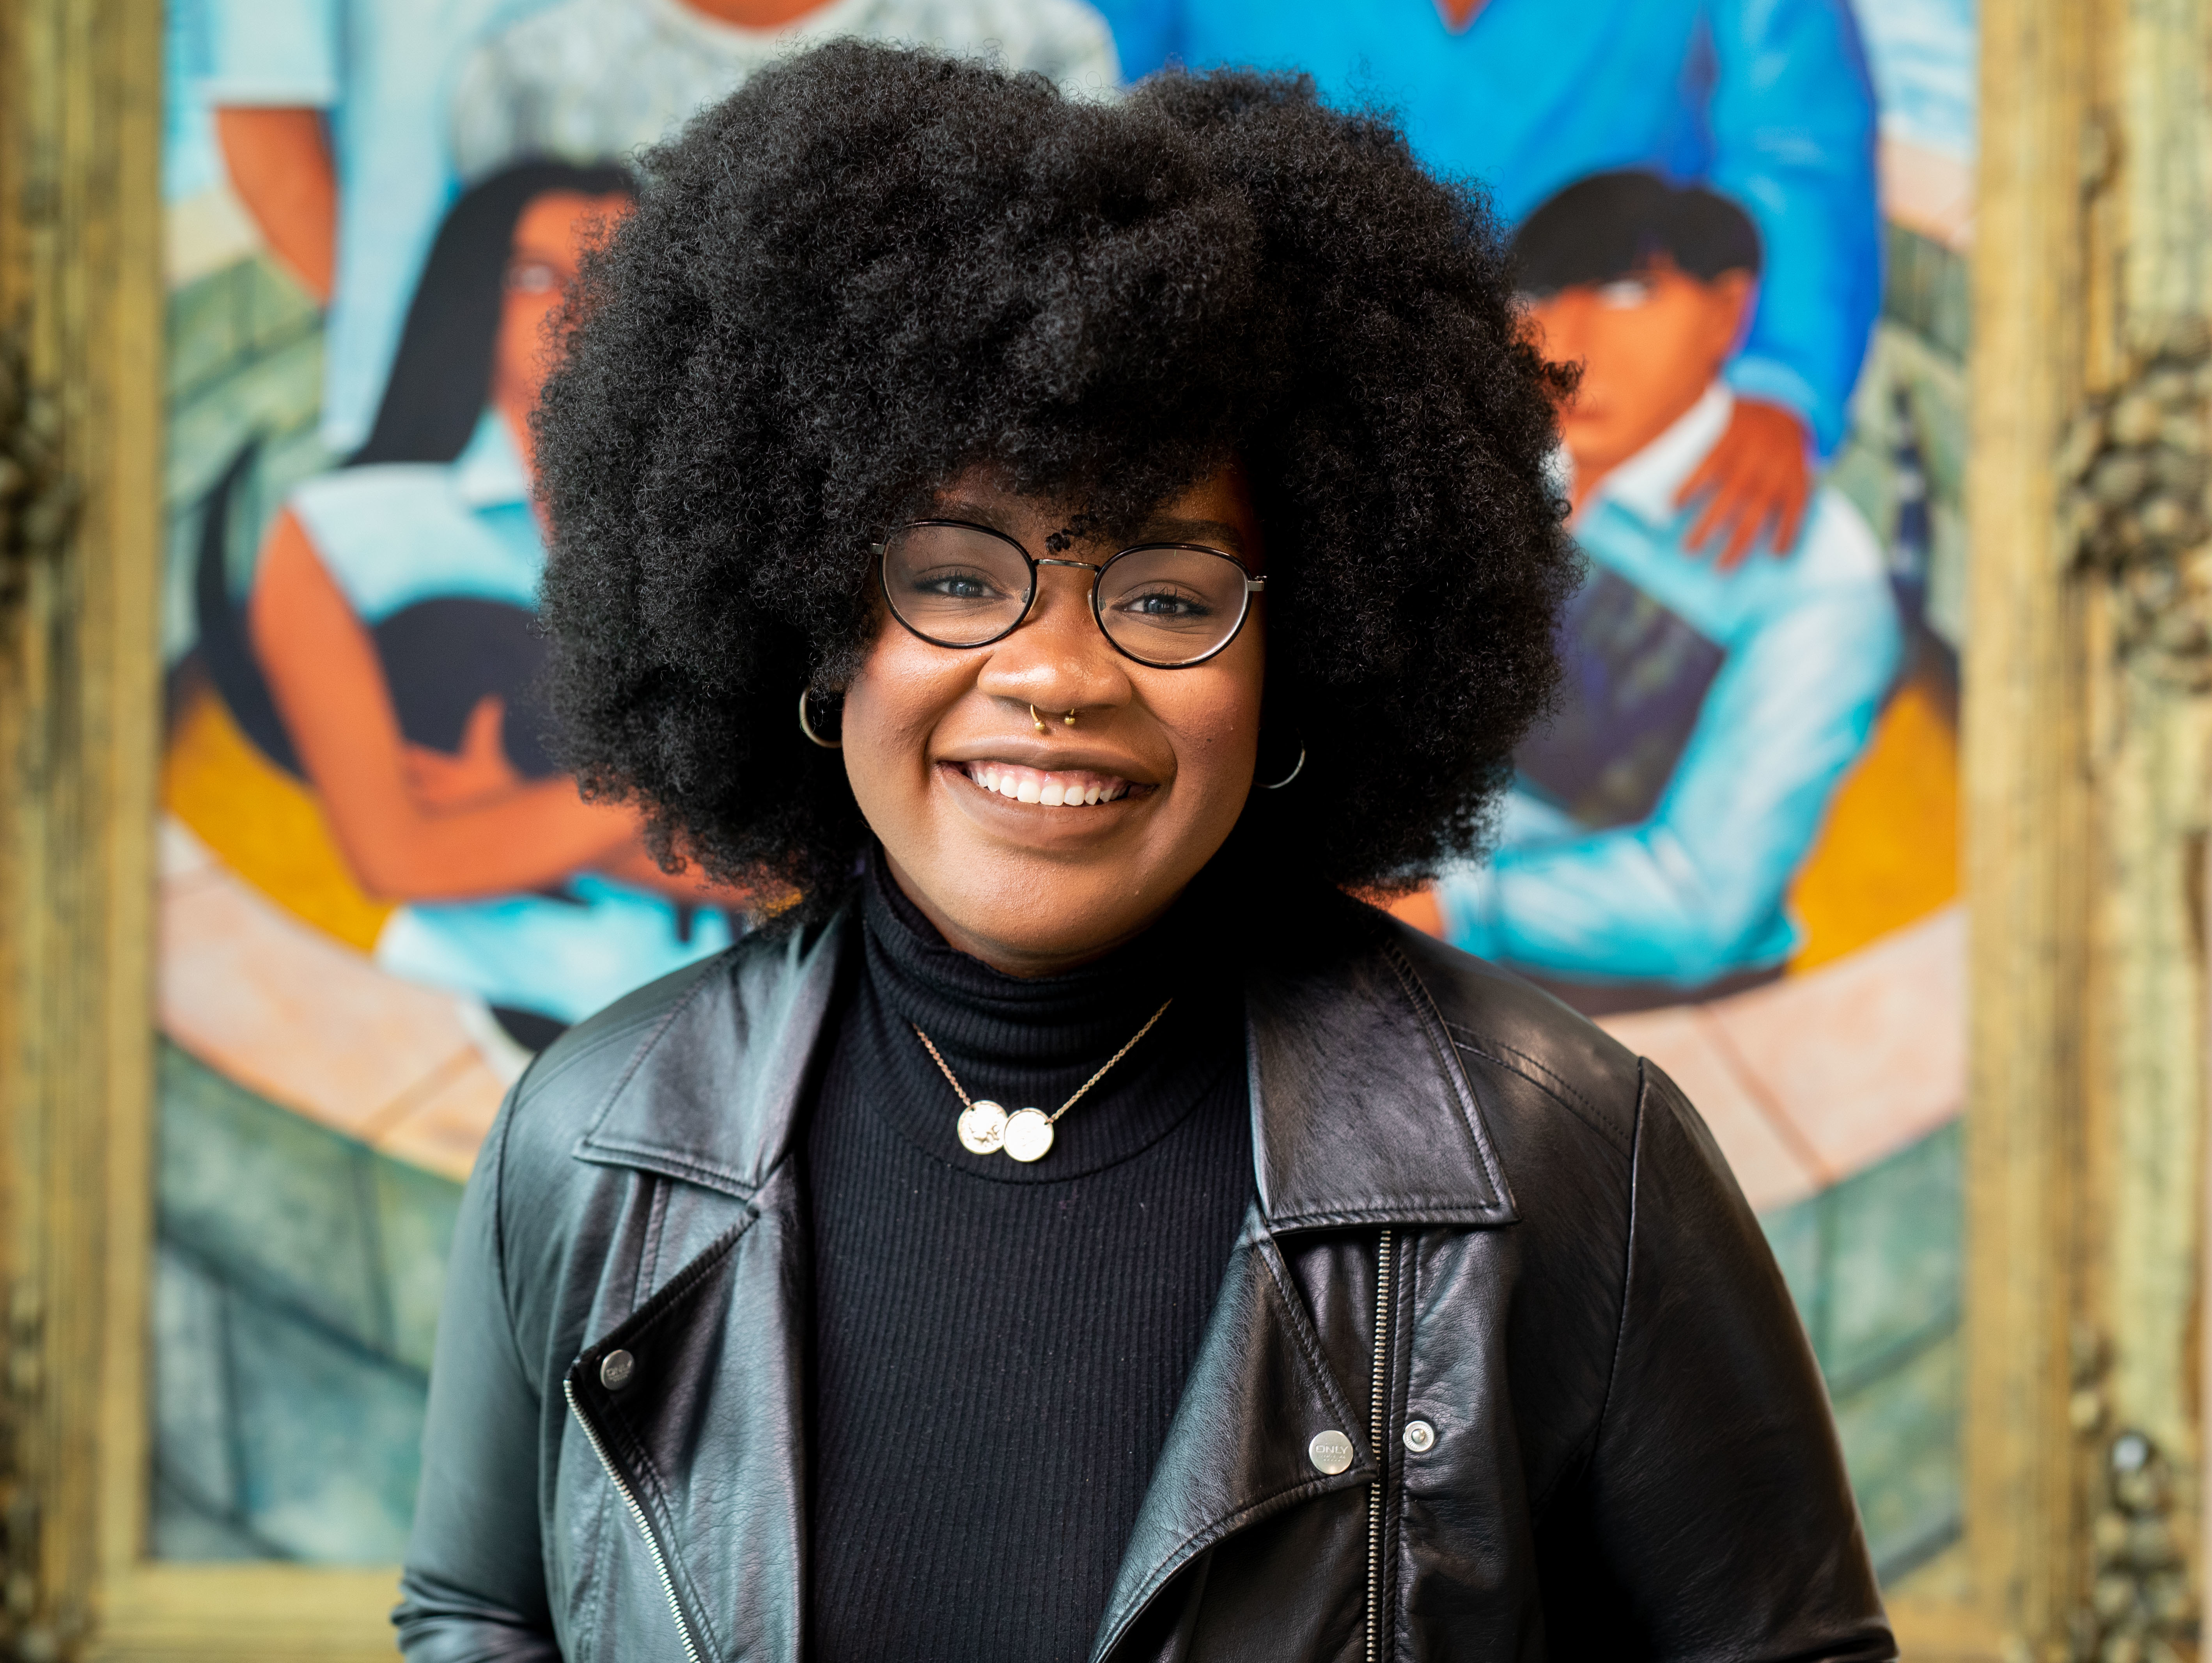 A Black woman with big dark hair and a leather jacket stands smiling in front of a mural.